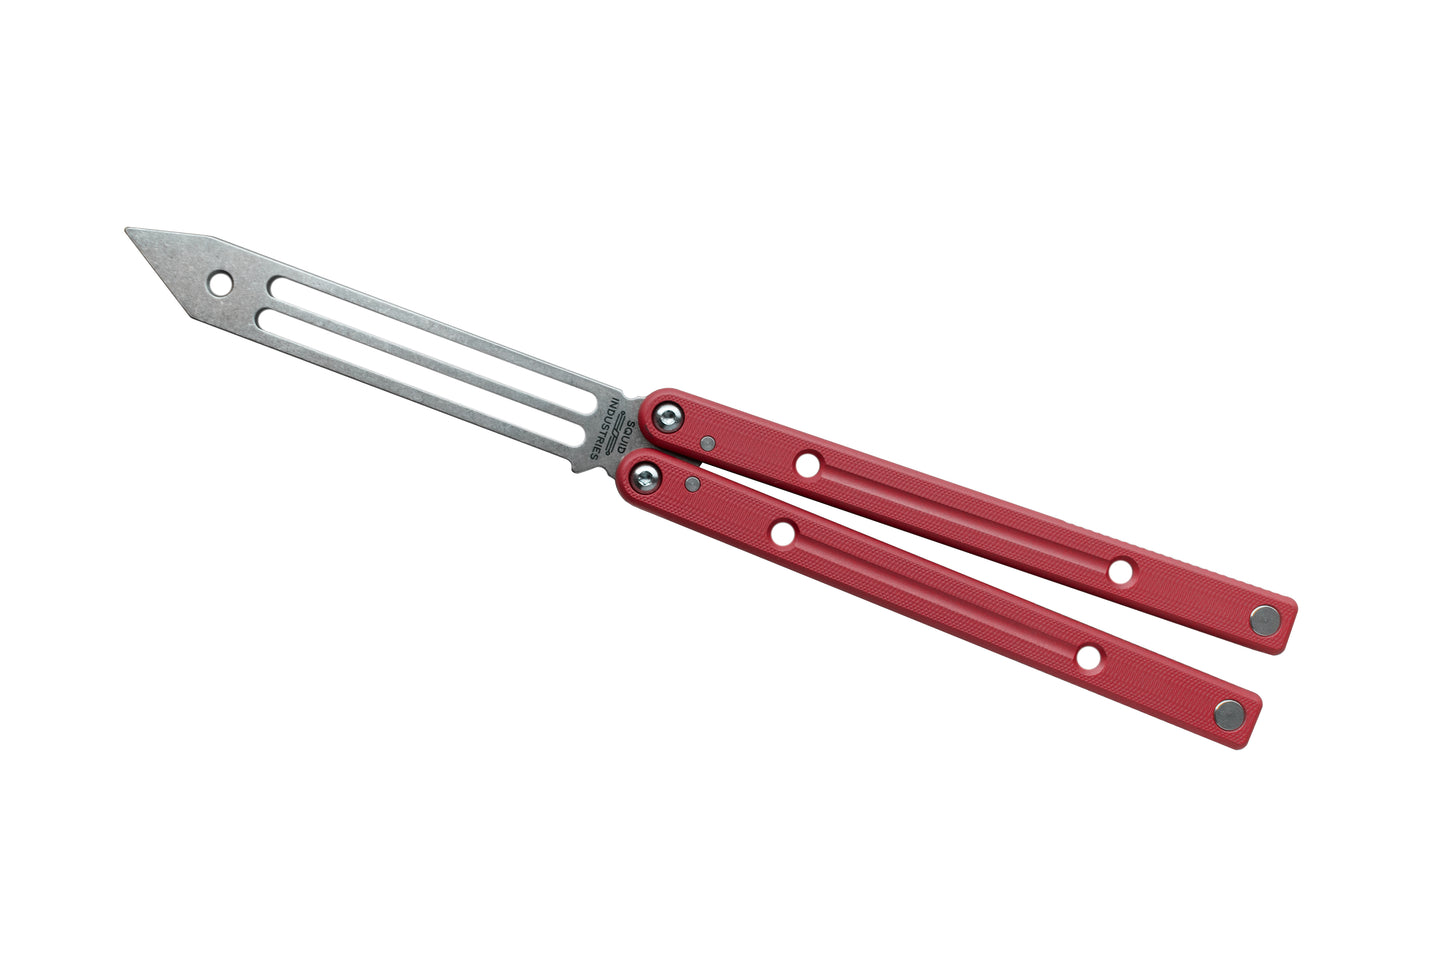 Red Clearance Blemished Squidtrainer V4 Balisong Butterfly Knife Trainer 